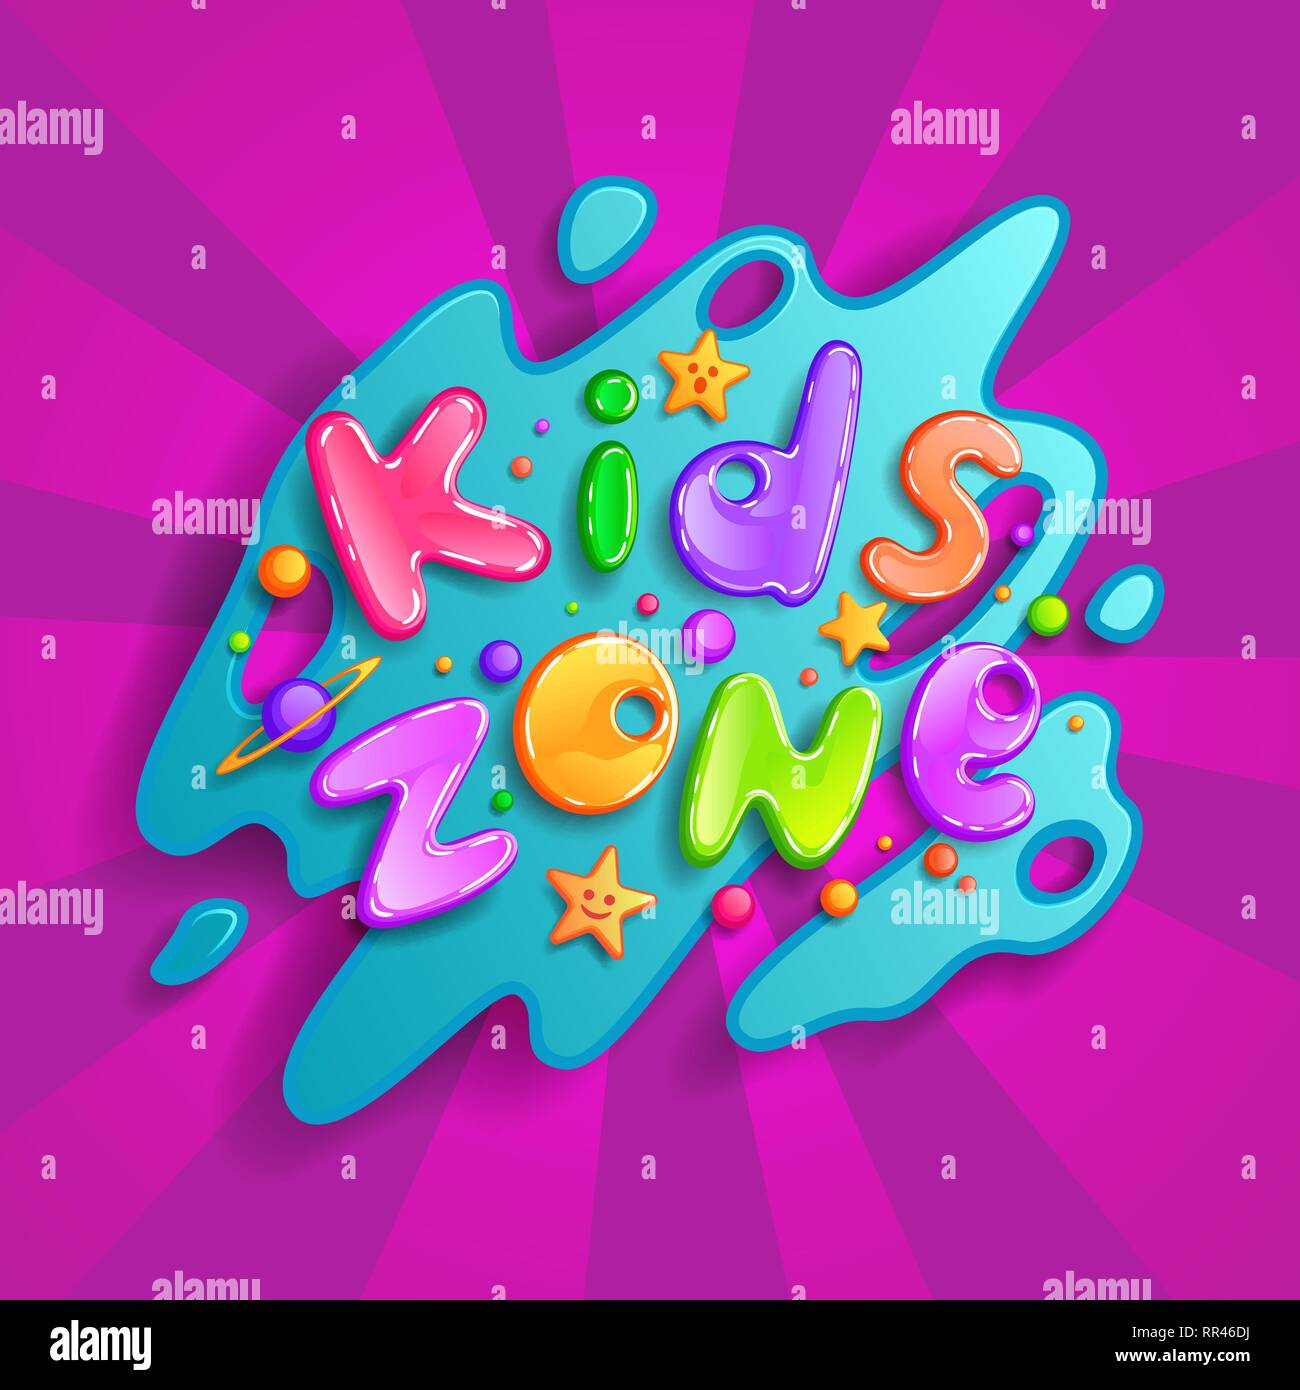 Kids zone vector cartoon logo. Colorful bubble letters for children playroom decoration. Inscription isolated on background Stock Vector